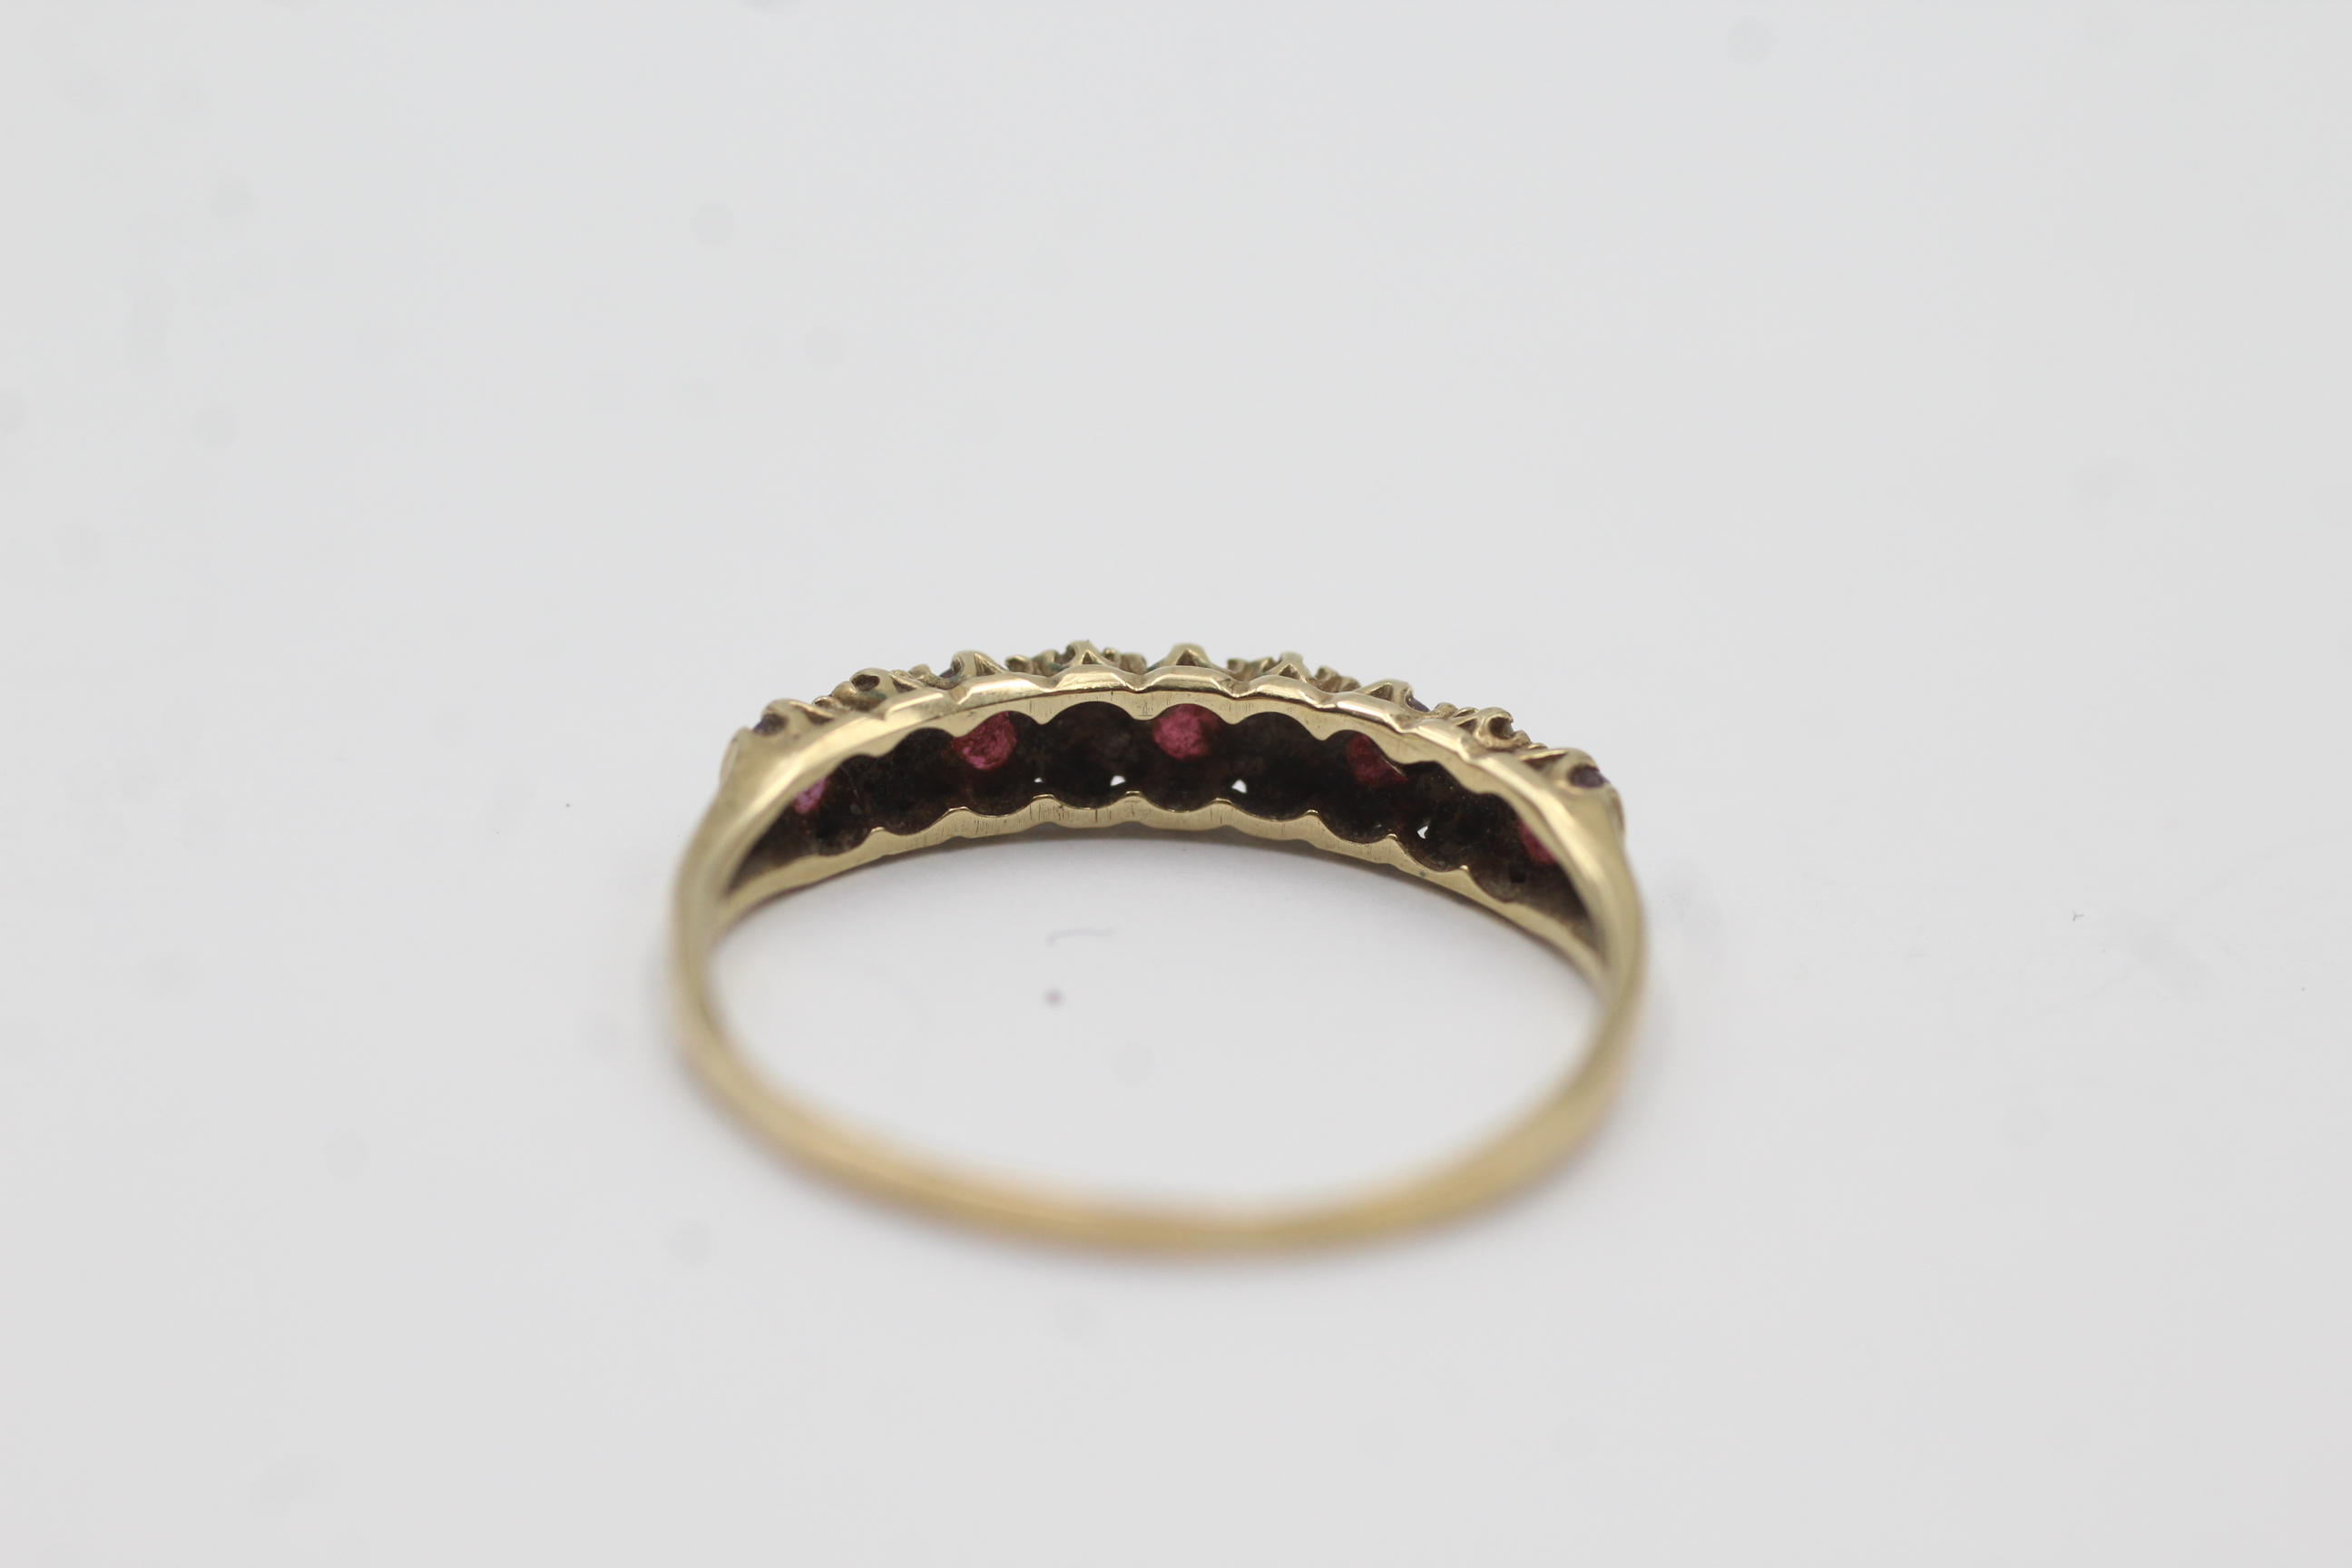 9ct gold ruby five stone ring with diamond spacers (1.4g) - Image 5 of 7